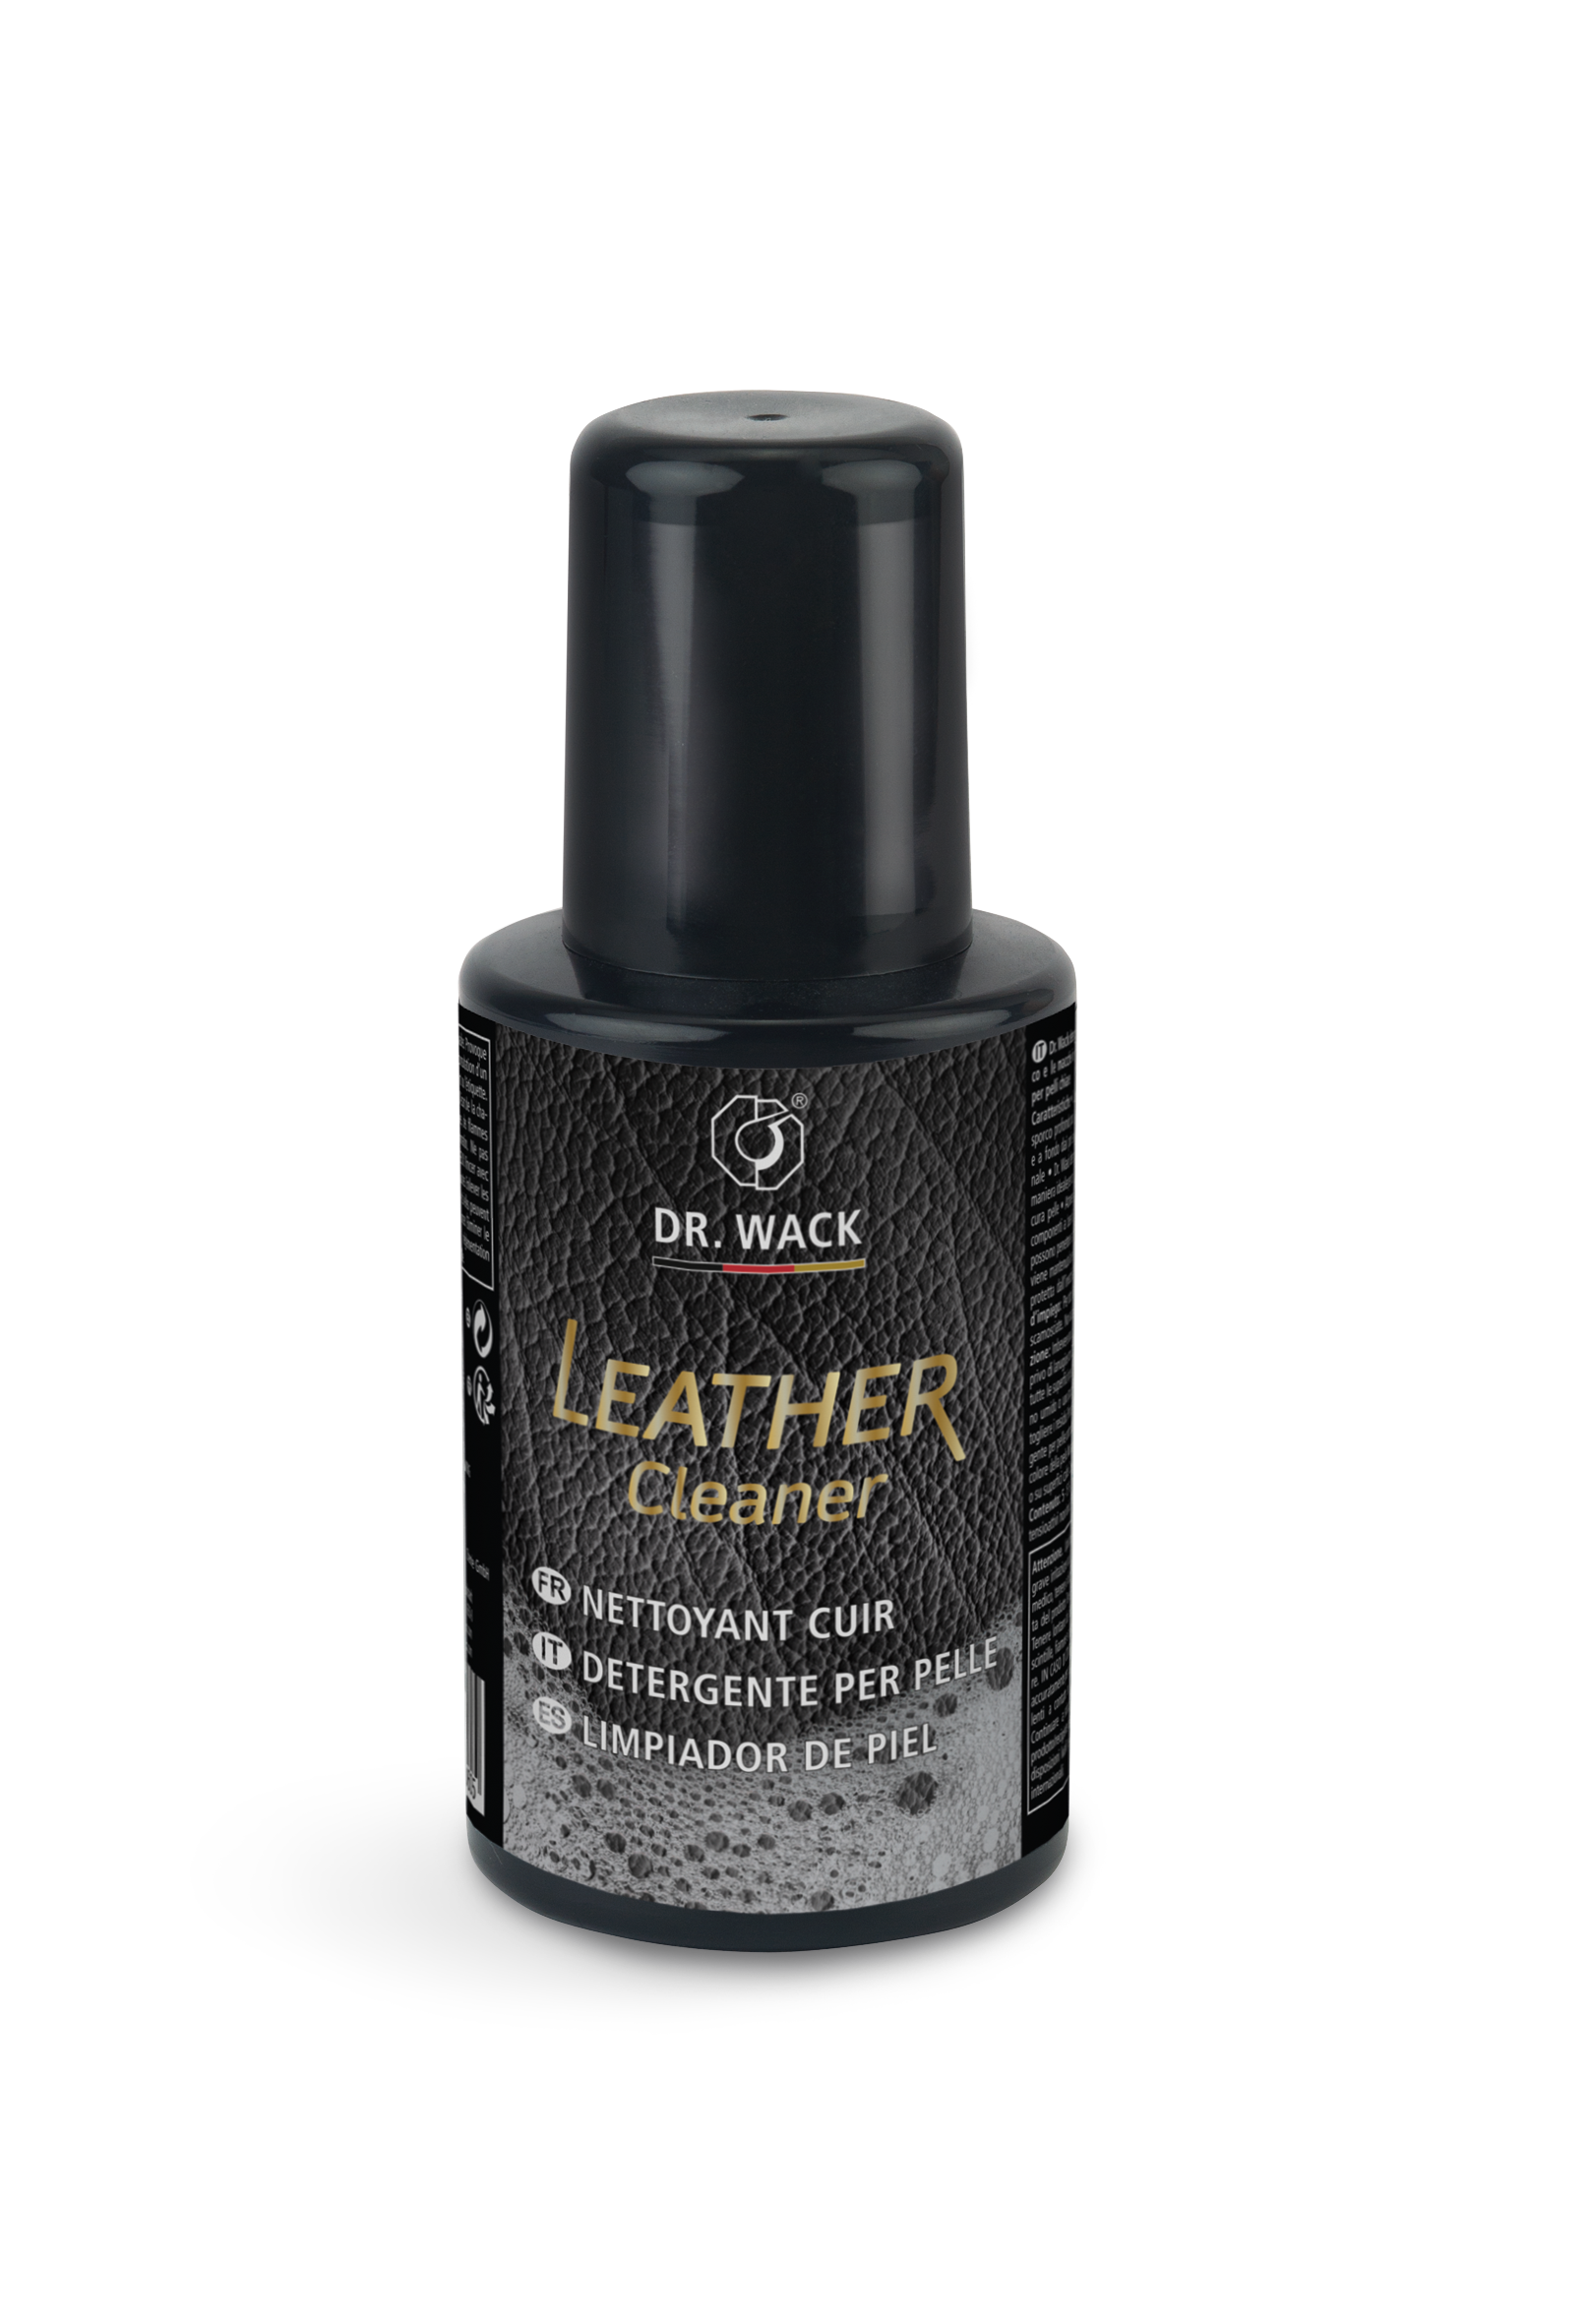 Dr. Wack Leather Cleaner